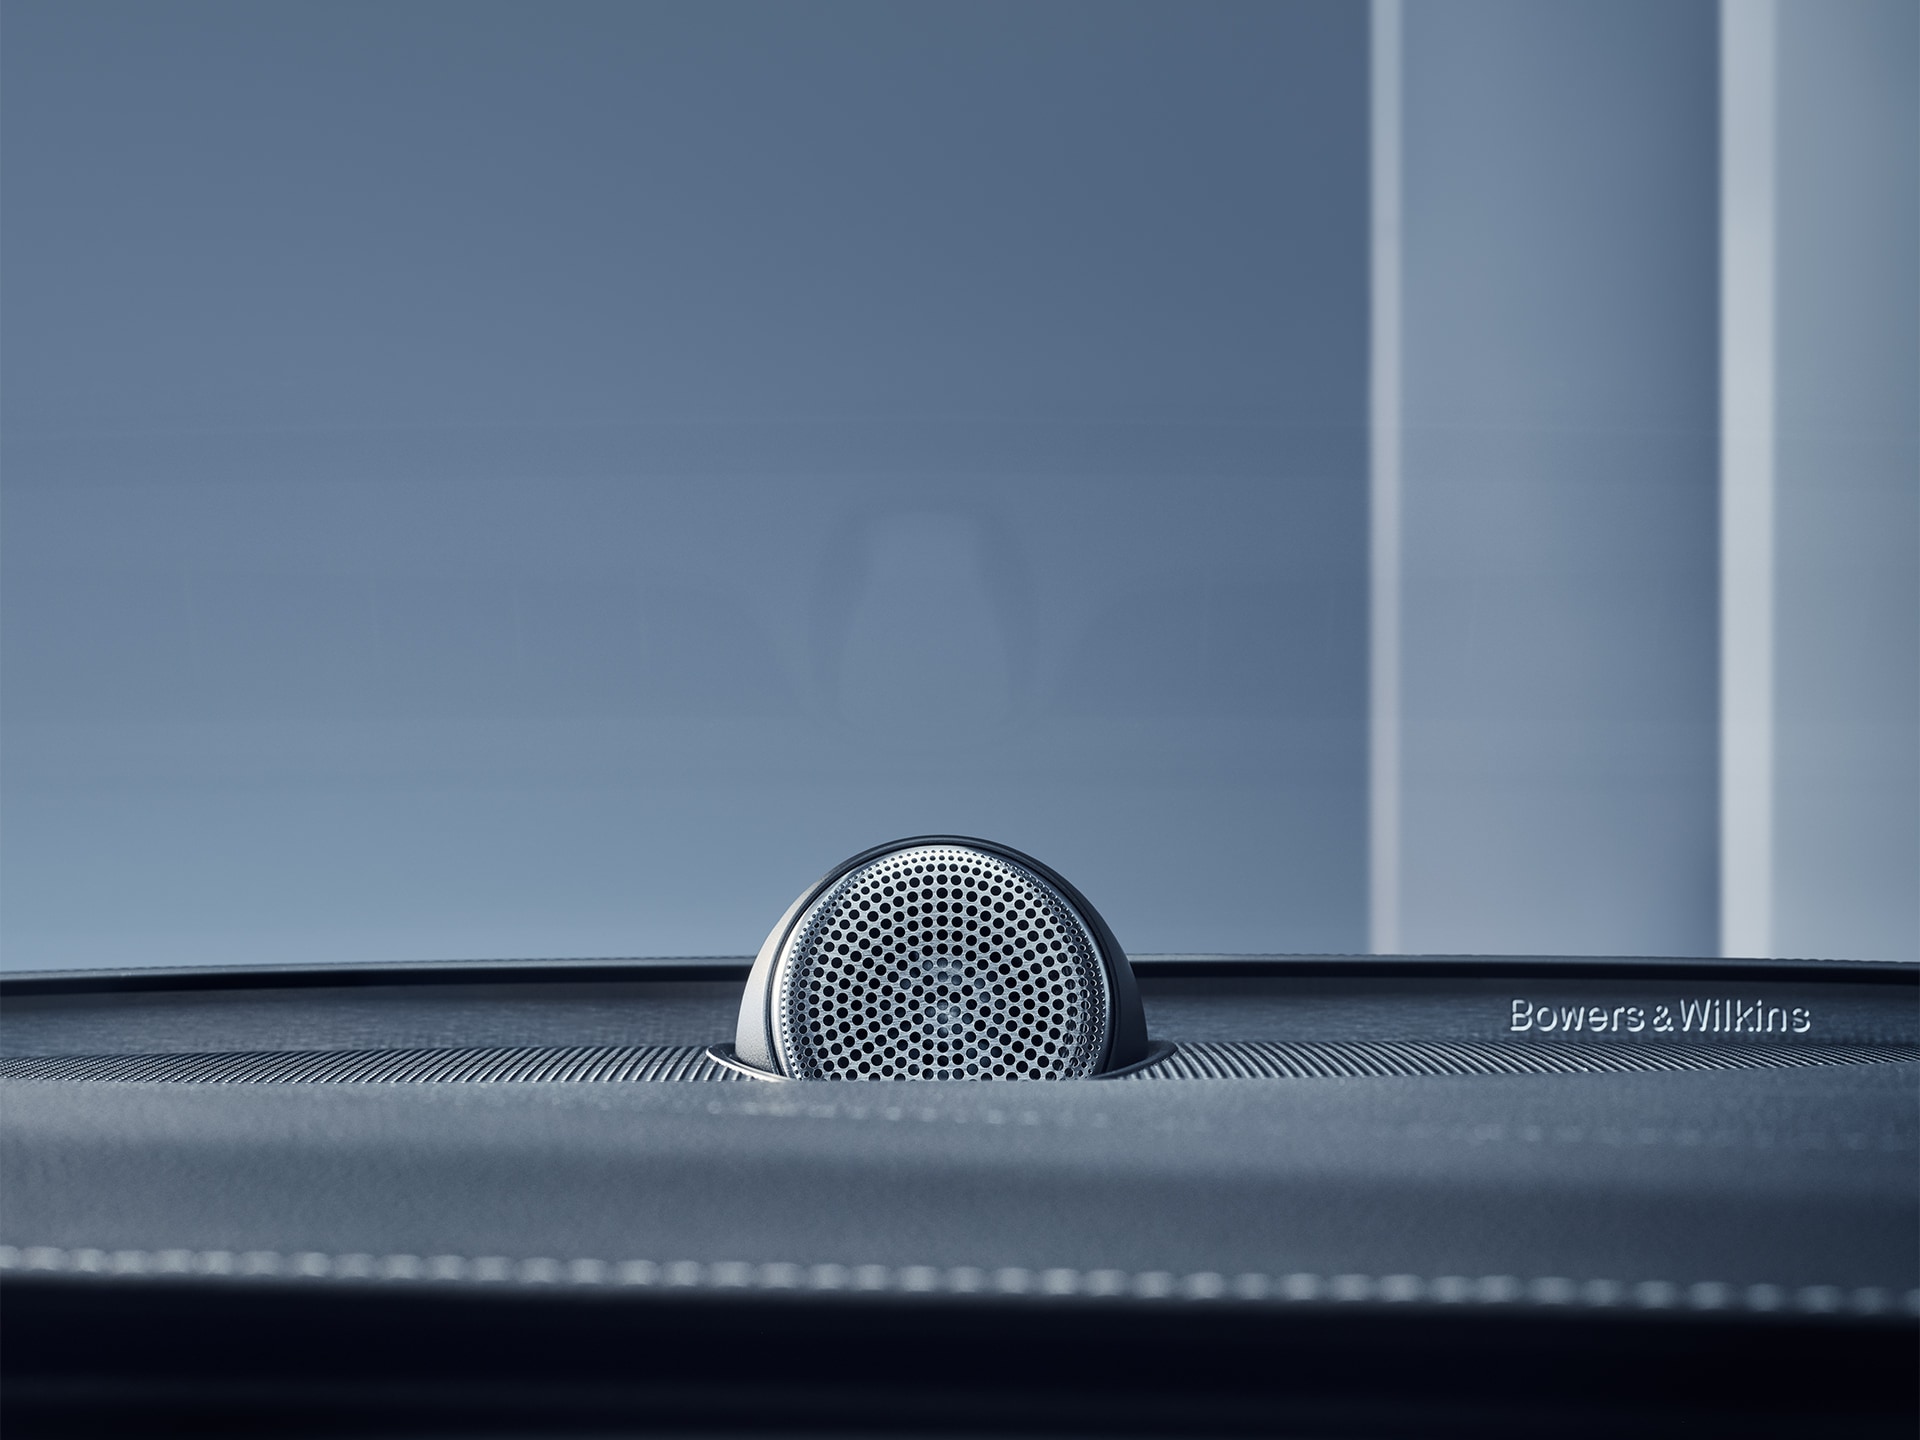 Close-up of a Bowers & Wilkins dashboard speaker in the Volvo XC90 mild hybrid SUV.